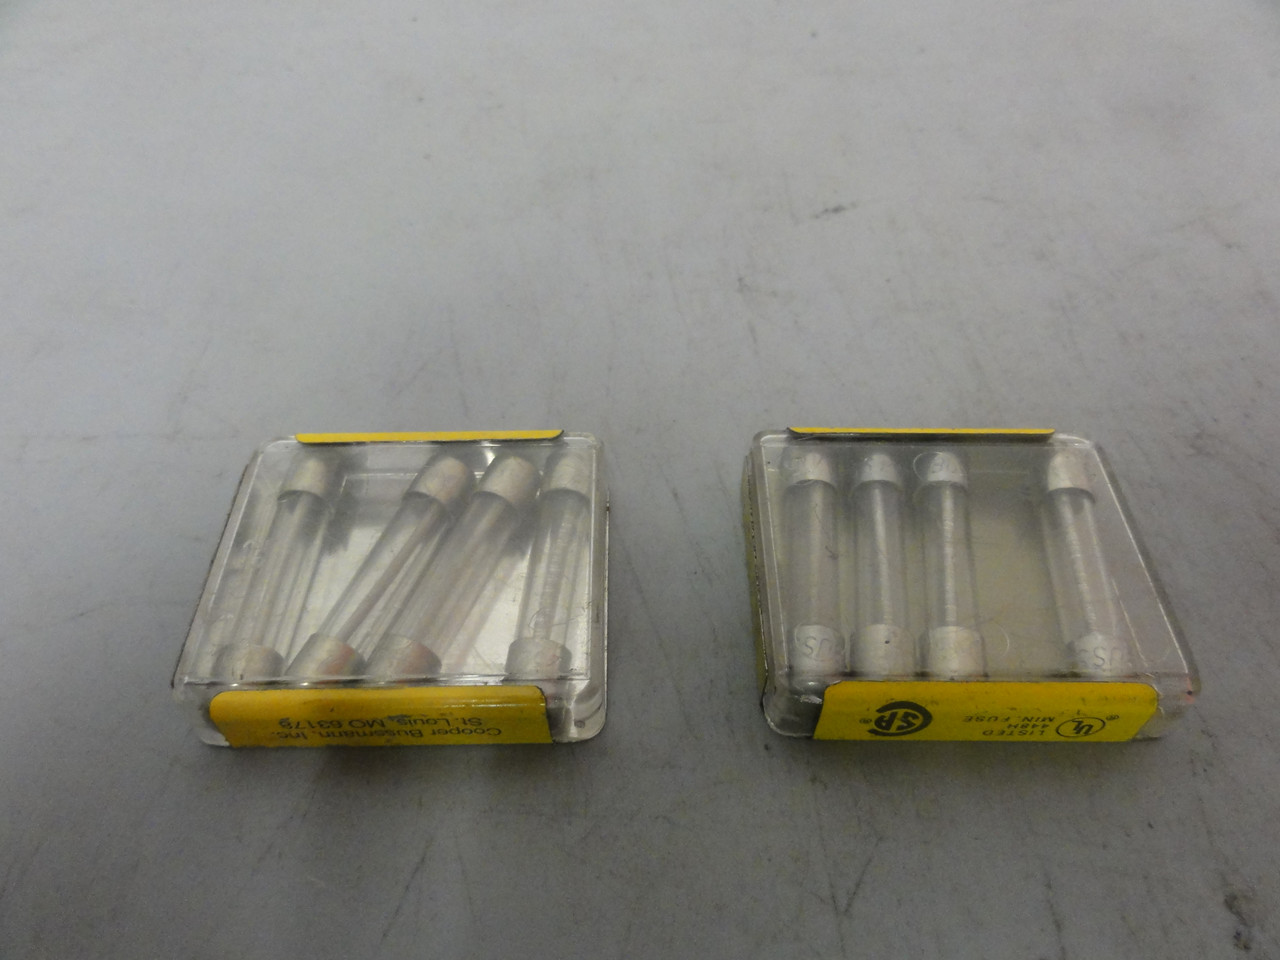 Bussmann Buss MDL-1/2 Time Delay Fuses (Lot of 8) Brand New